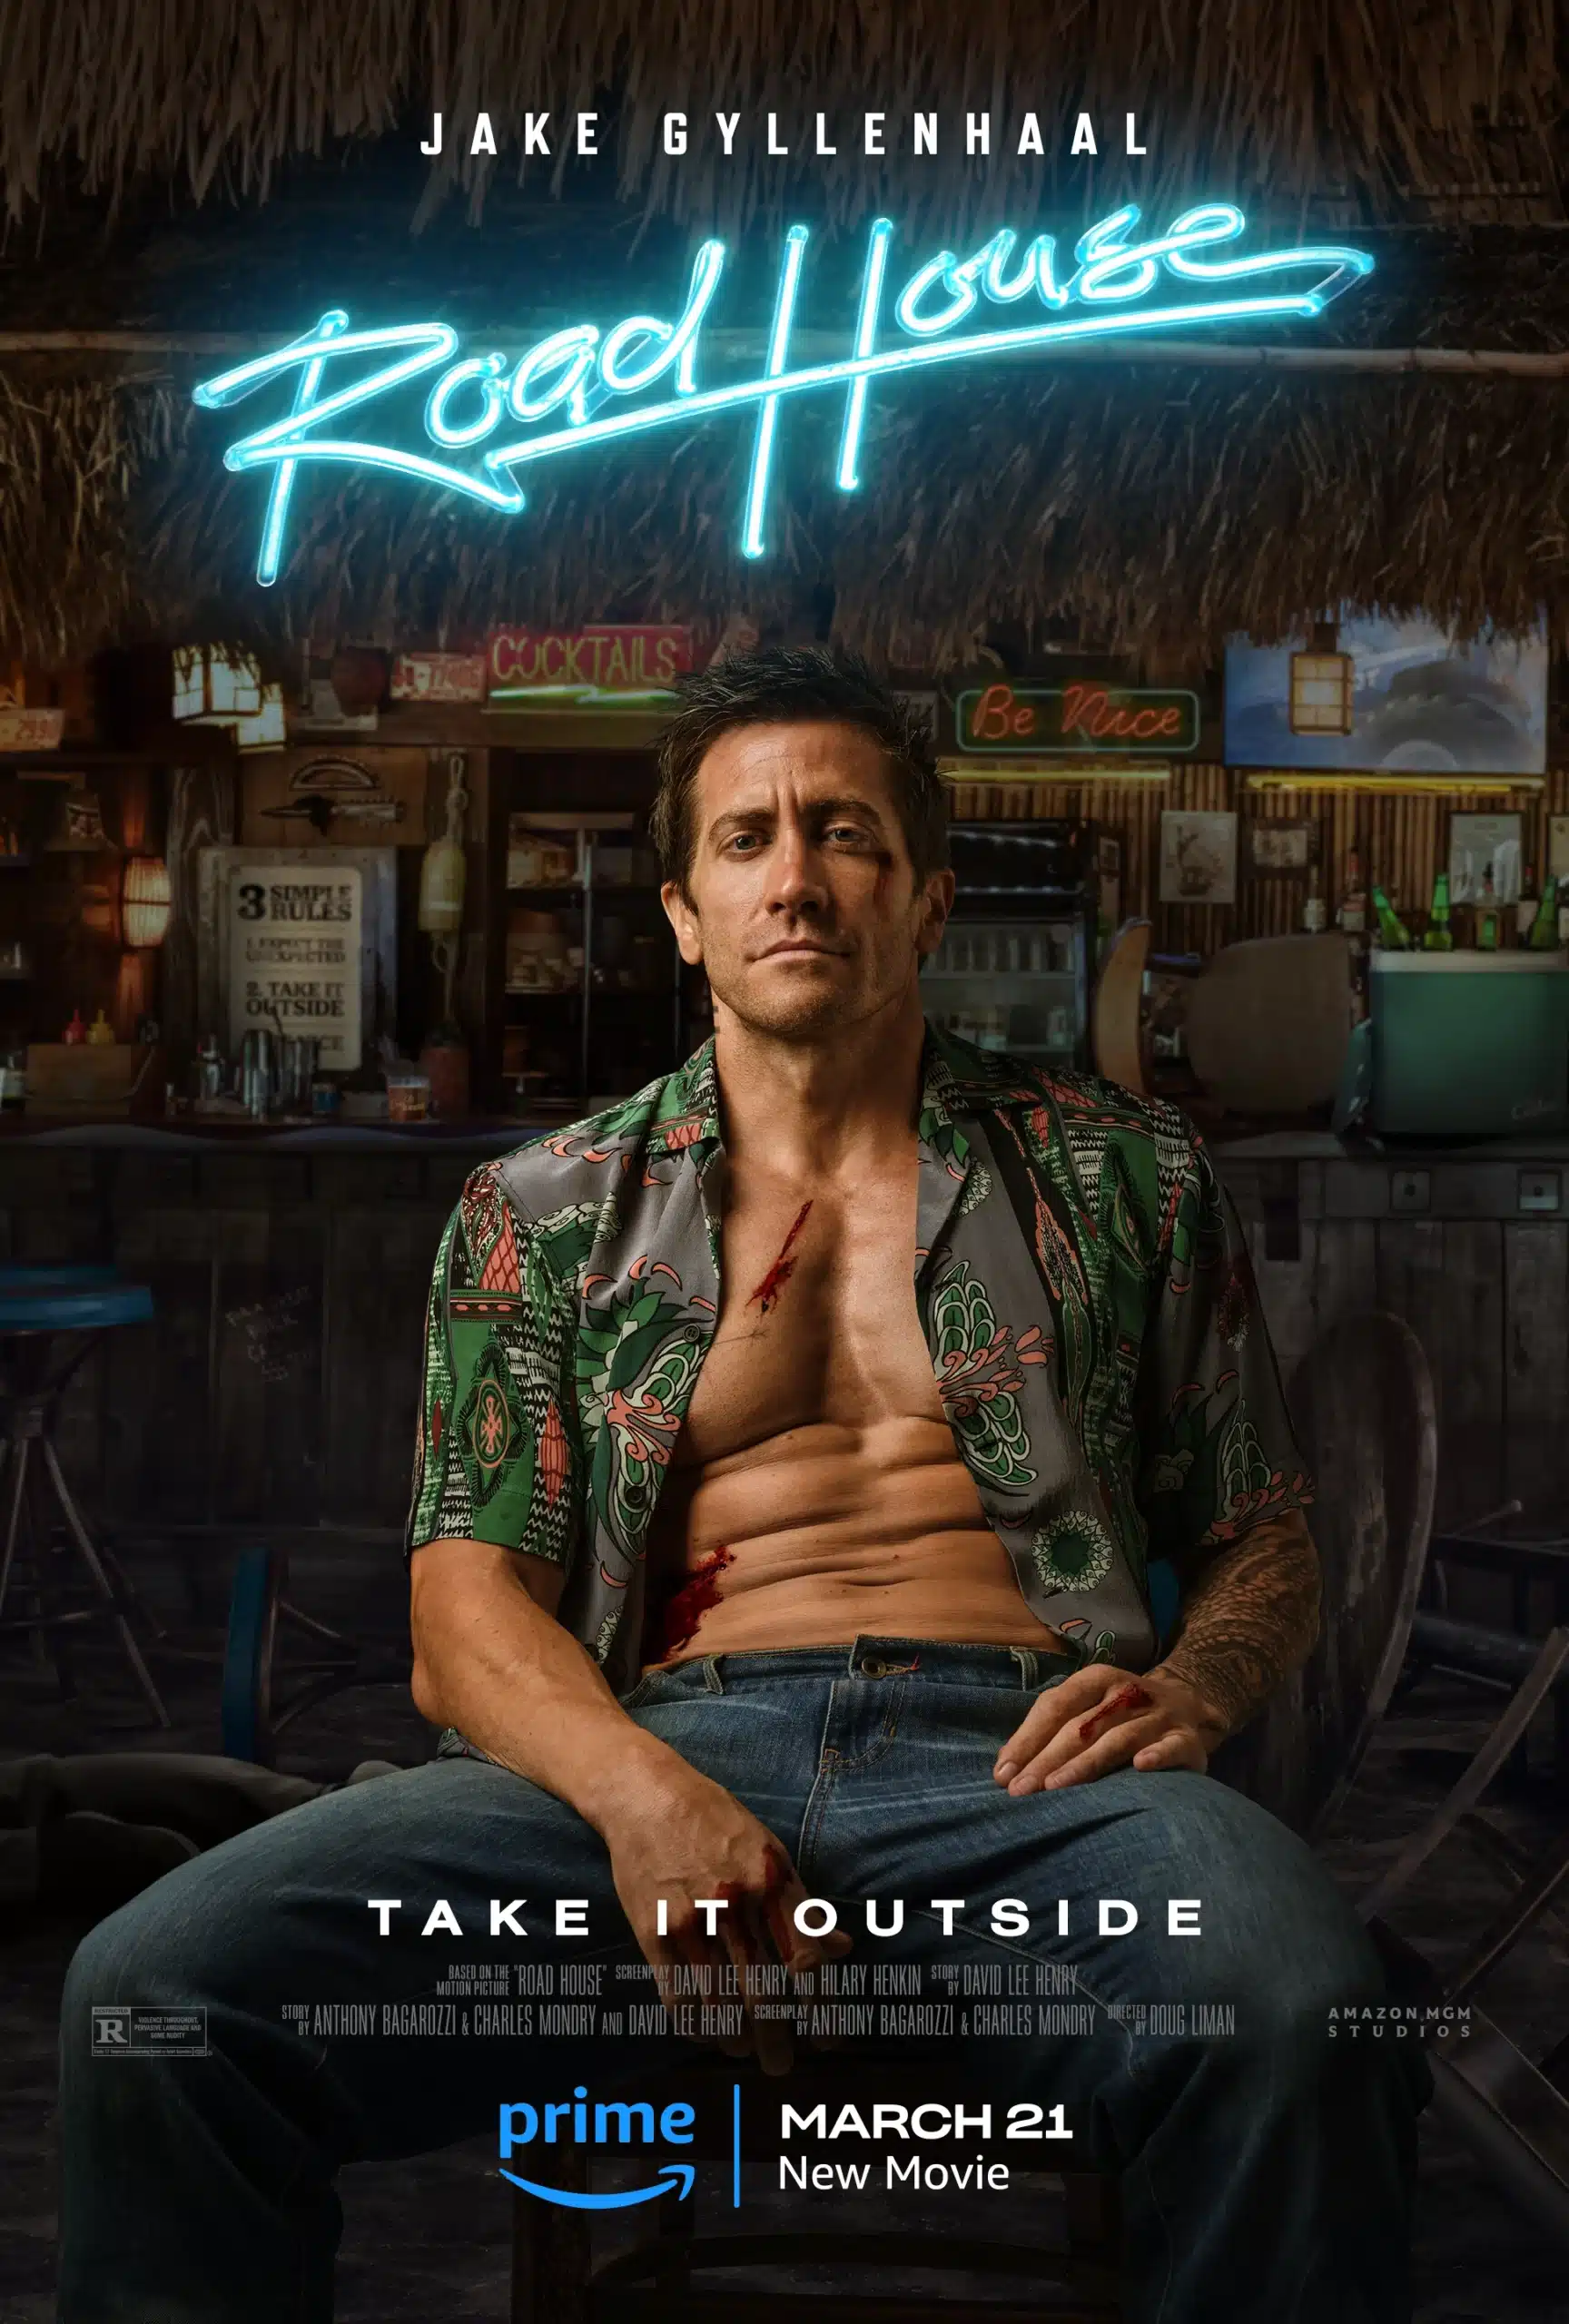 Prime Video Road House remake poster.